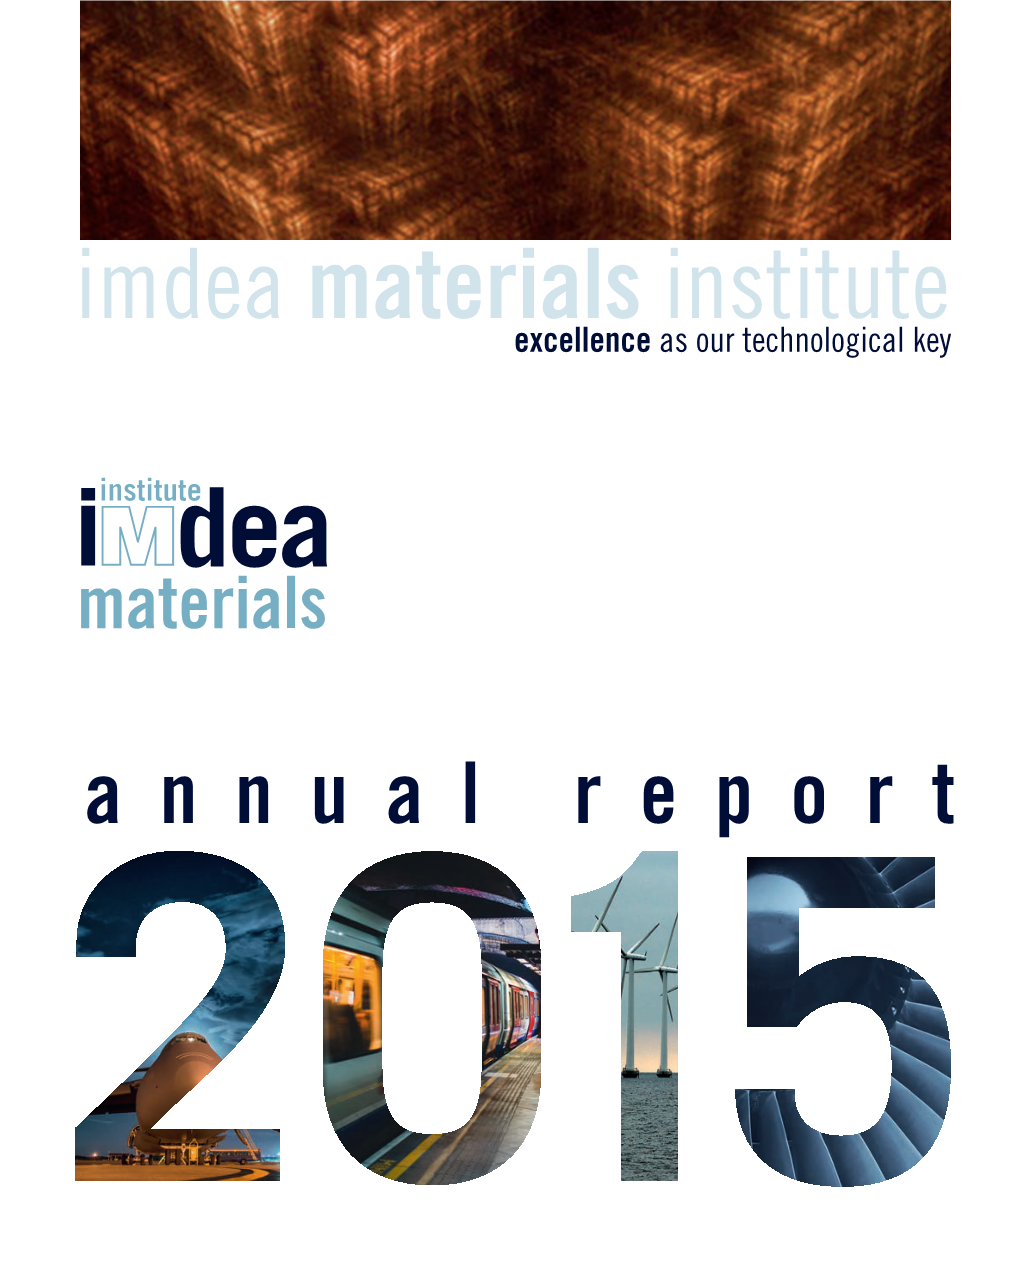 Imdea Materials Institute Excellence As Our Technological Key